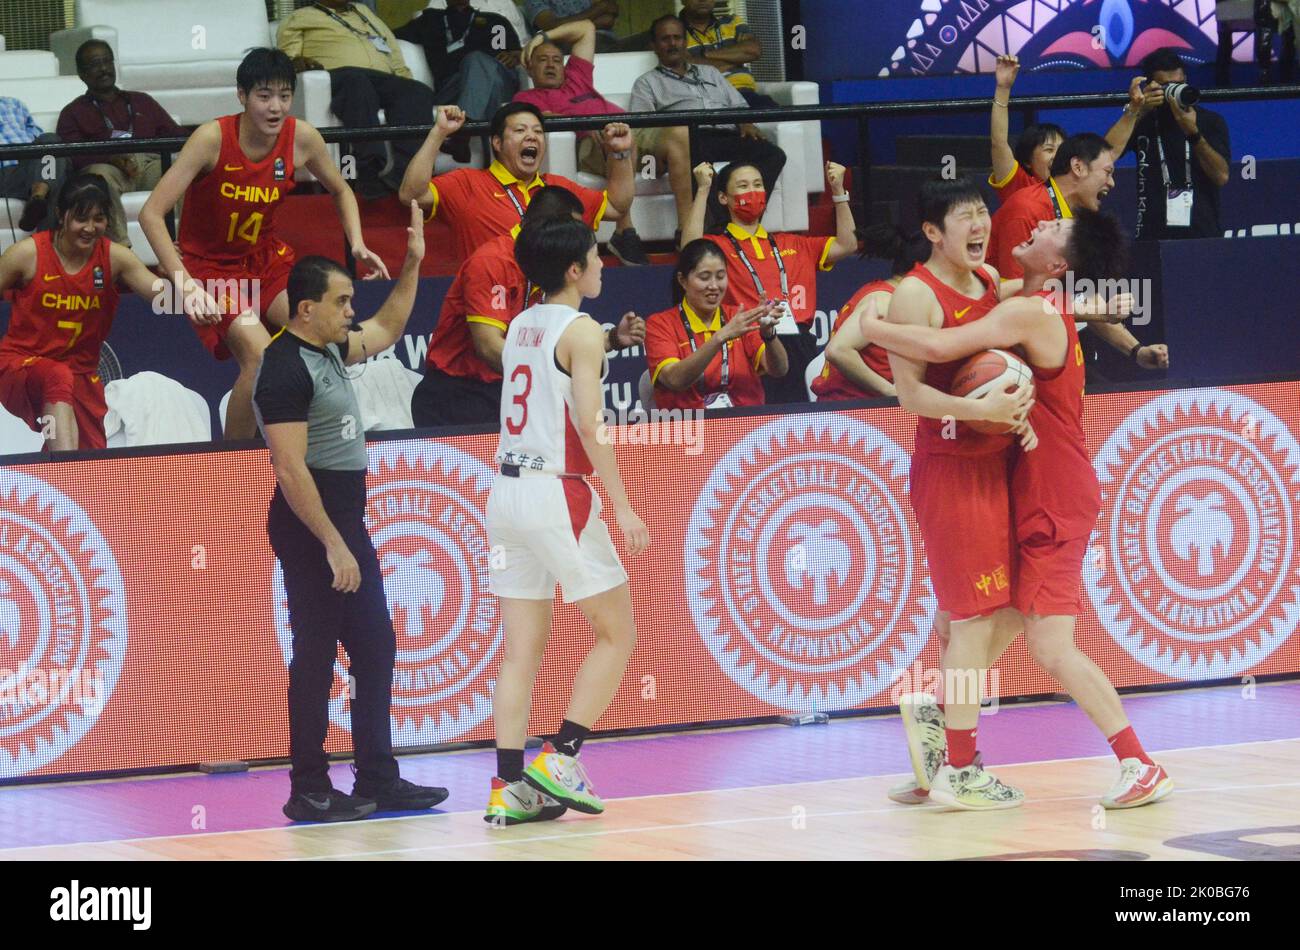 Bangalore, India. 10th Sep, 2022. Members of China celebrate after winning the semifinal match against Japan at the FIBA U18 Women's Asian Basketball Championship in Bangalore, India, Sept. 10, 2022. Credit: Str/Xinhua/Alamy Live News Stock Photo